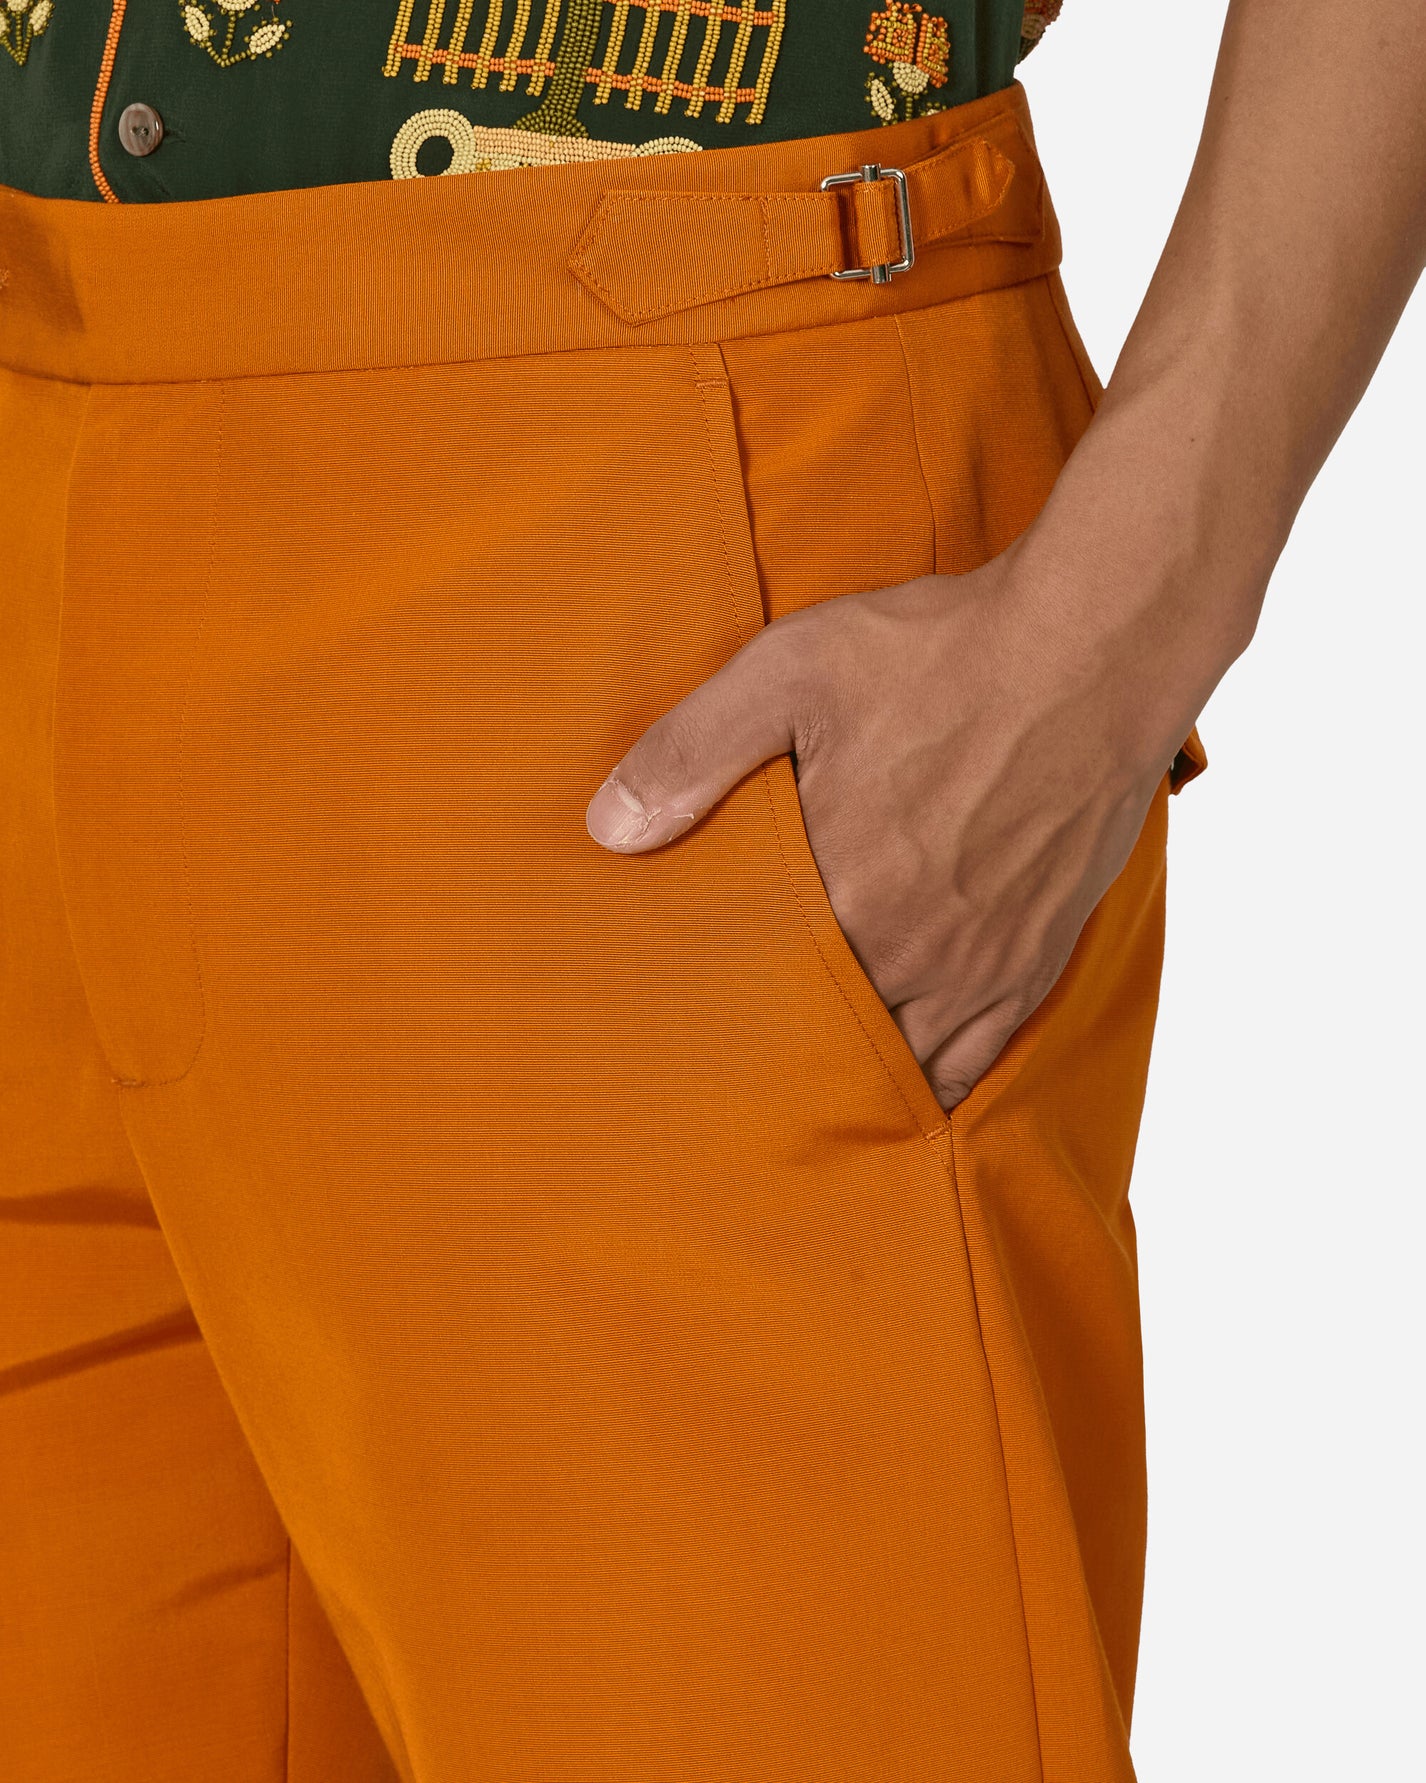 Bode Ginger Faille Trousers Orange Pants Casual MRS24BT022 1